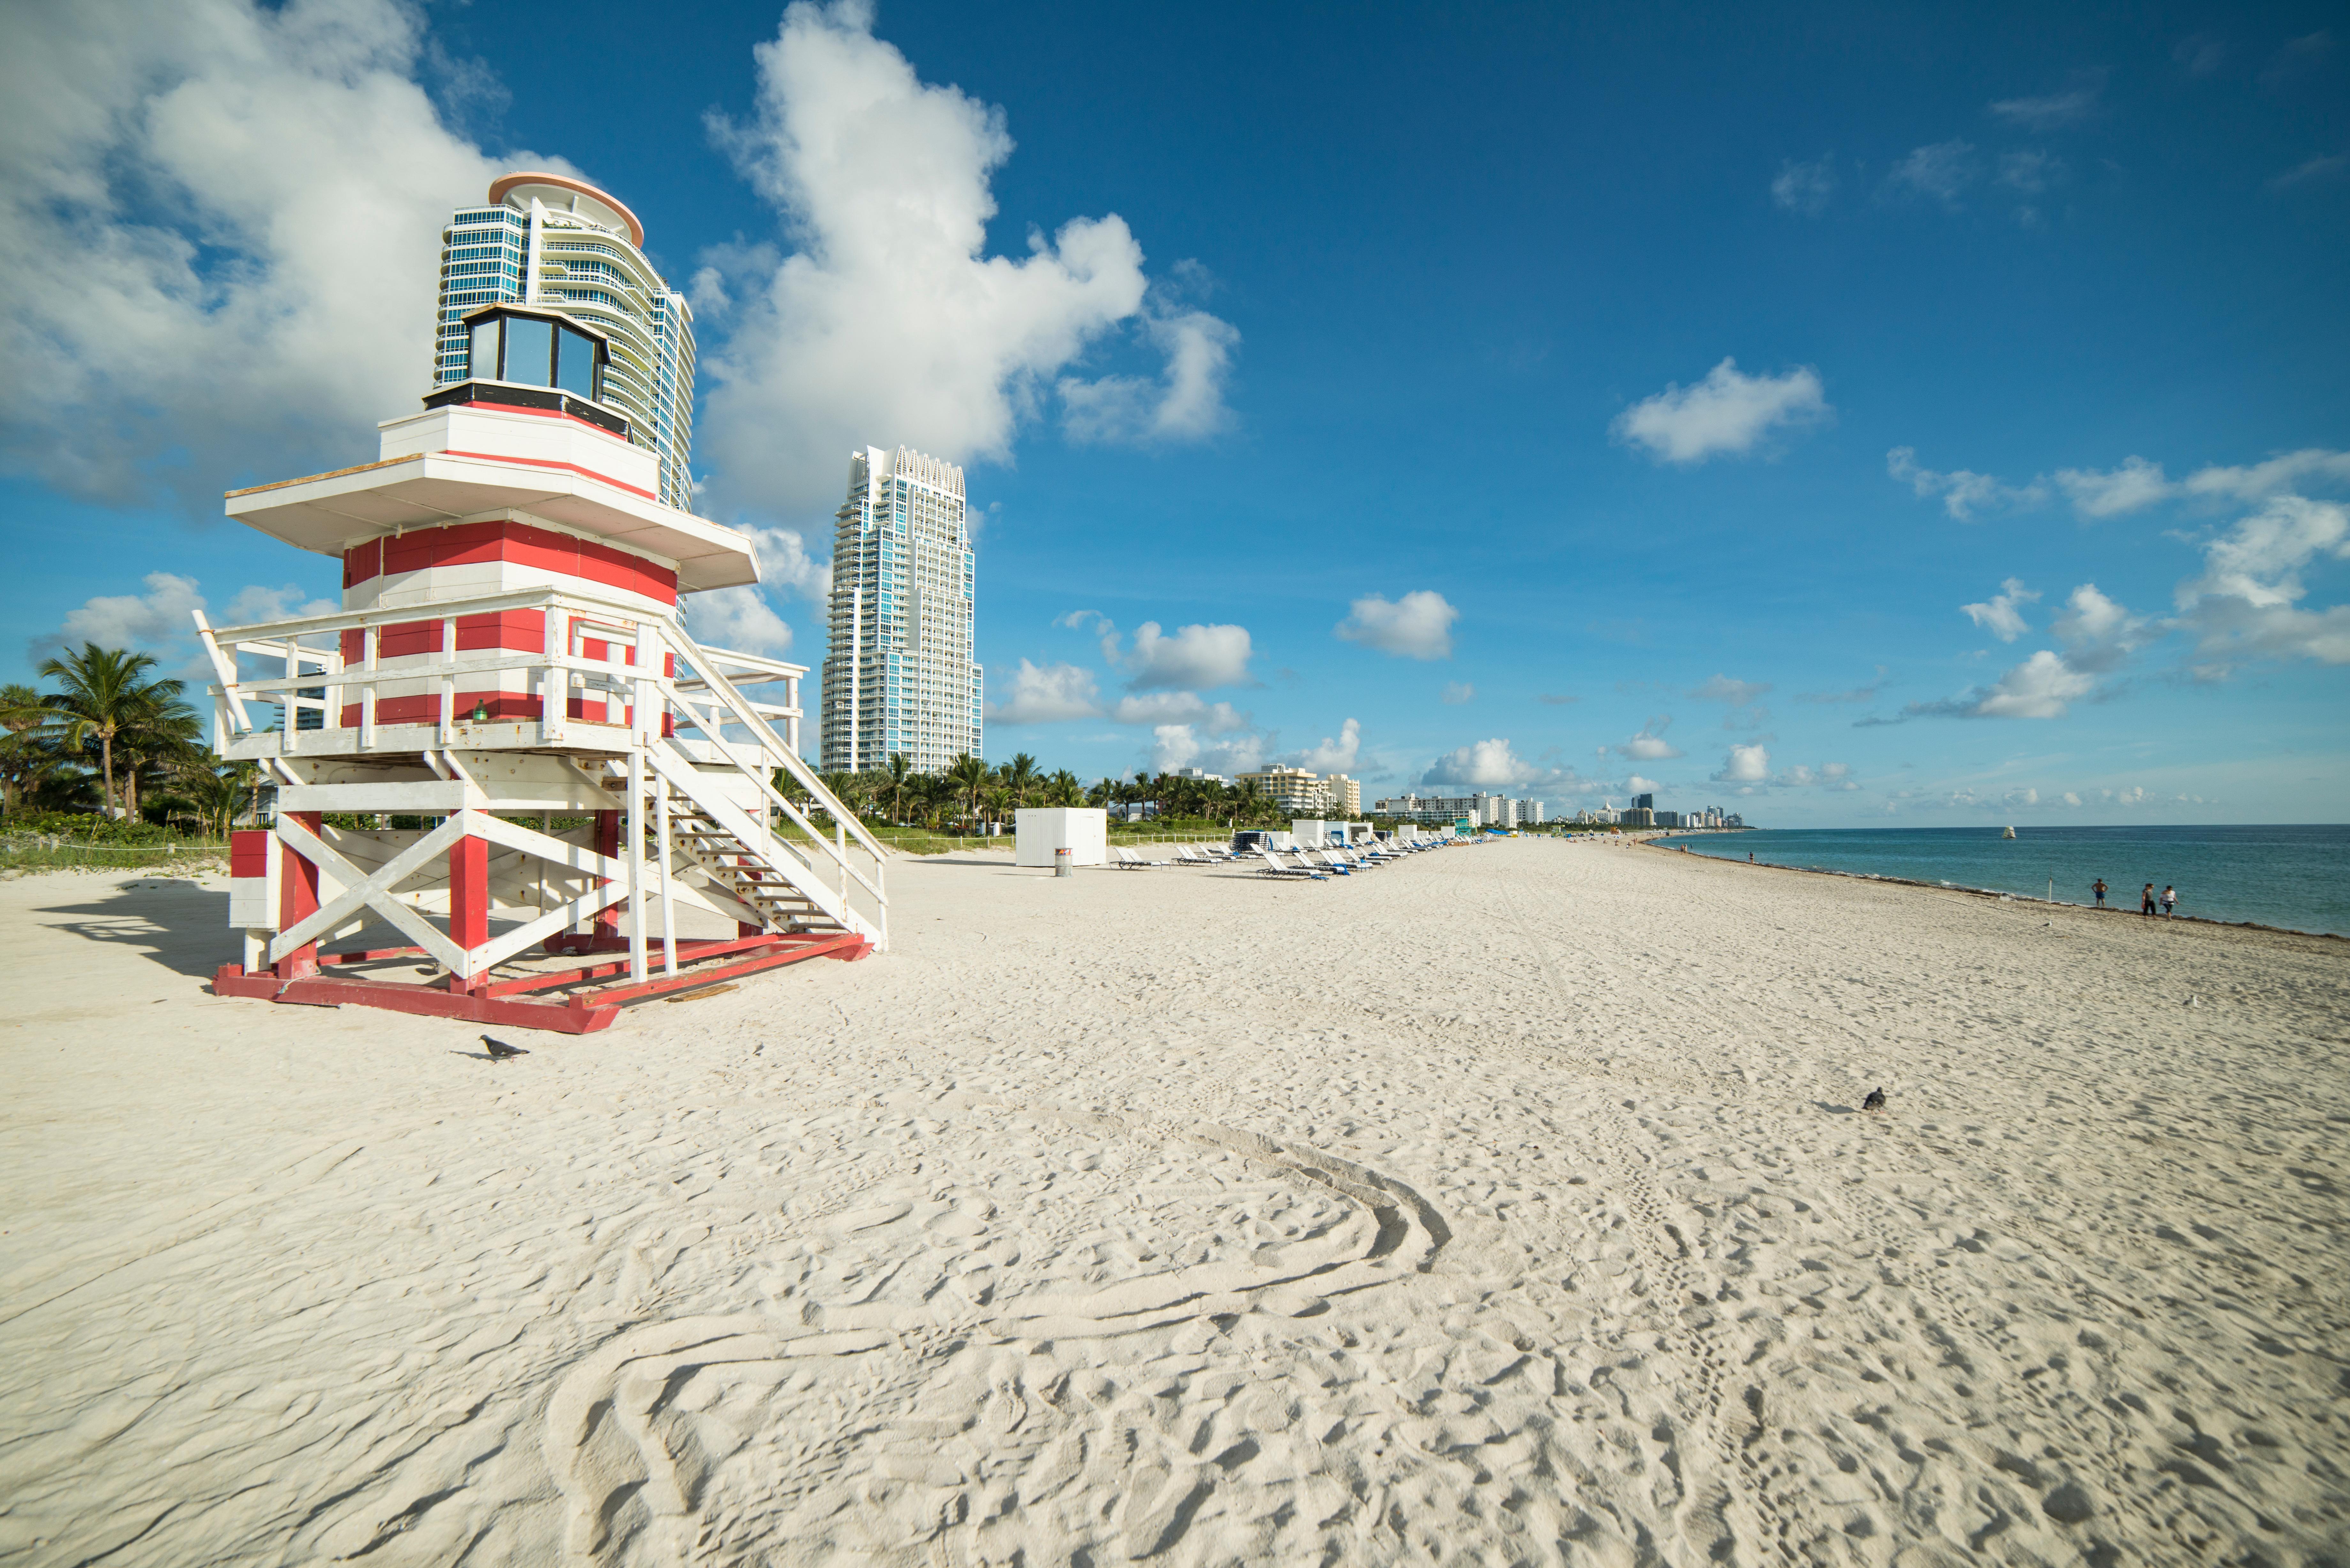 RED SOUTH BEACH HOTEL MIAMI 3* (United States) - from 121 |